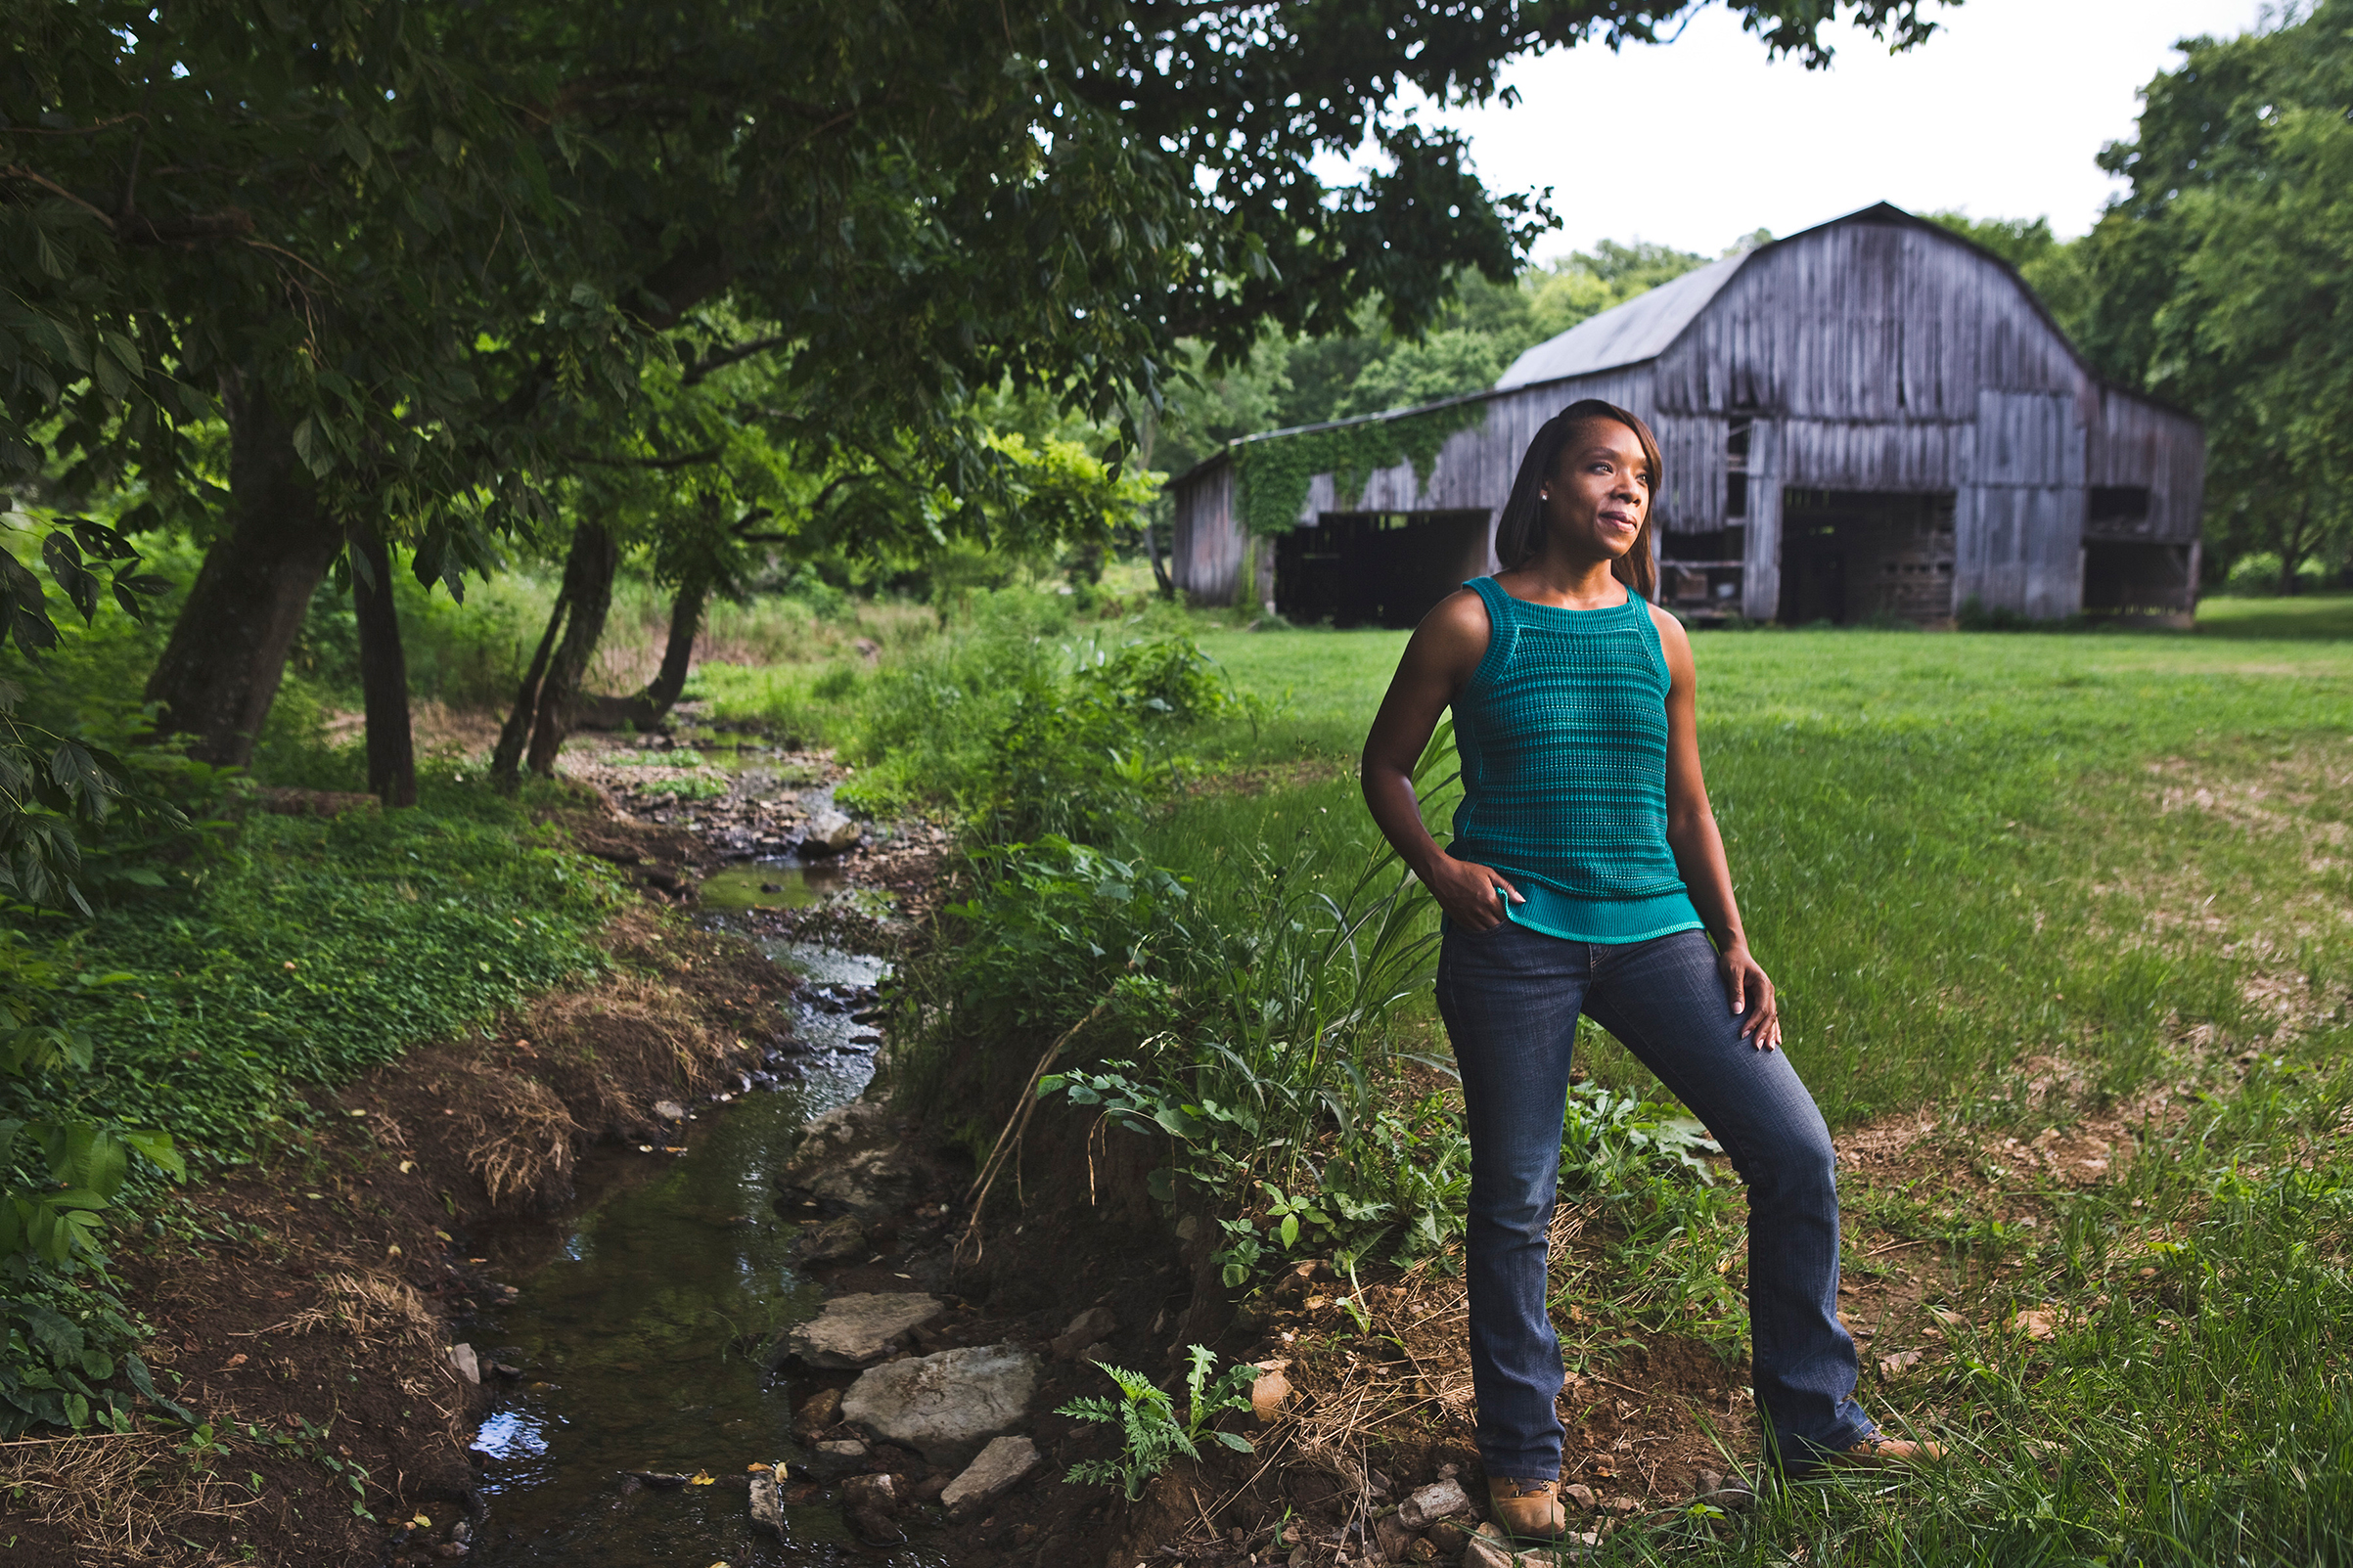 Fawn Weaver on the farm she bought where Nearest Green and Jack Daniel first distilled whiskey, in Lynchburg, Tenn., June 21, 2017. (Nathan Morgan—The New York Times/Redux)